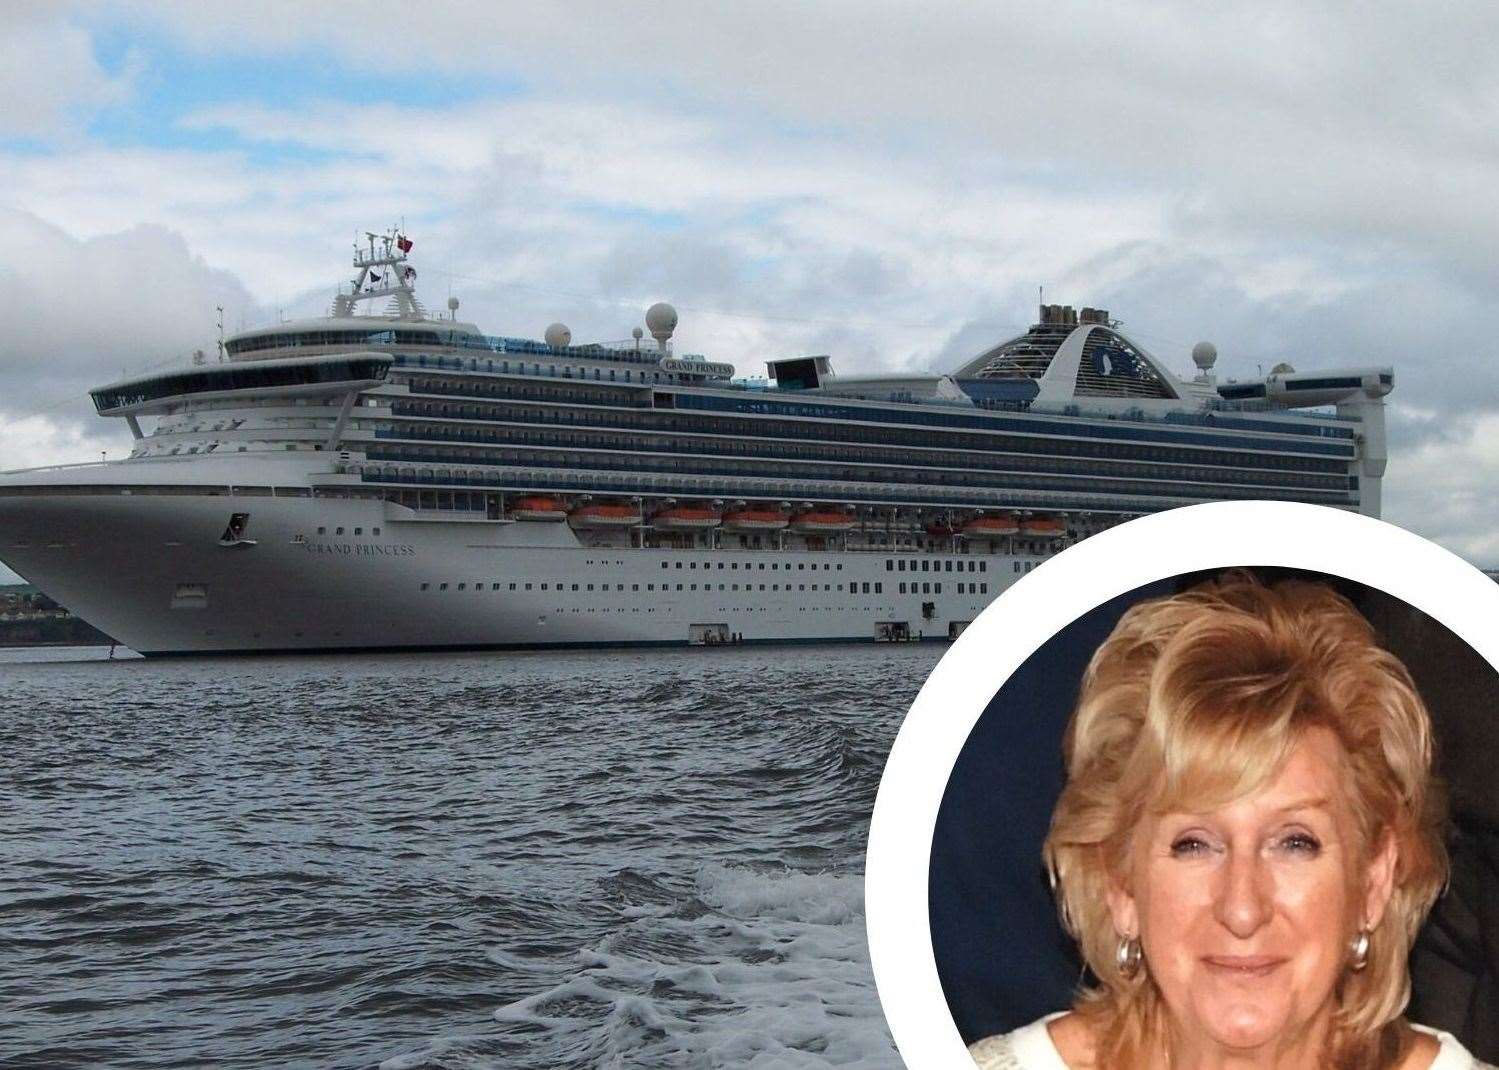 The Grand Princess cruise ship and Jackie Bissell, who is stuck in her cabin amid a coronavirus outbreak